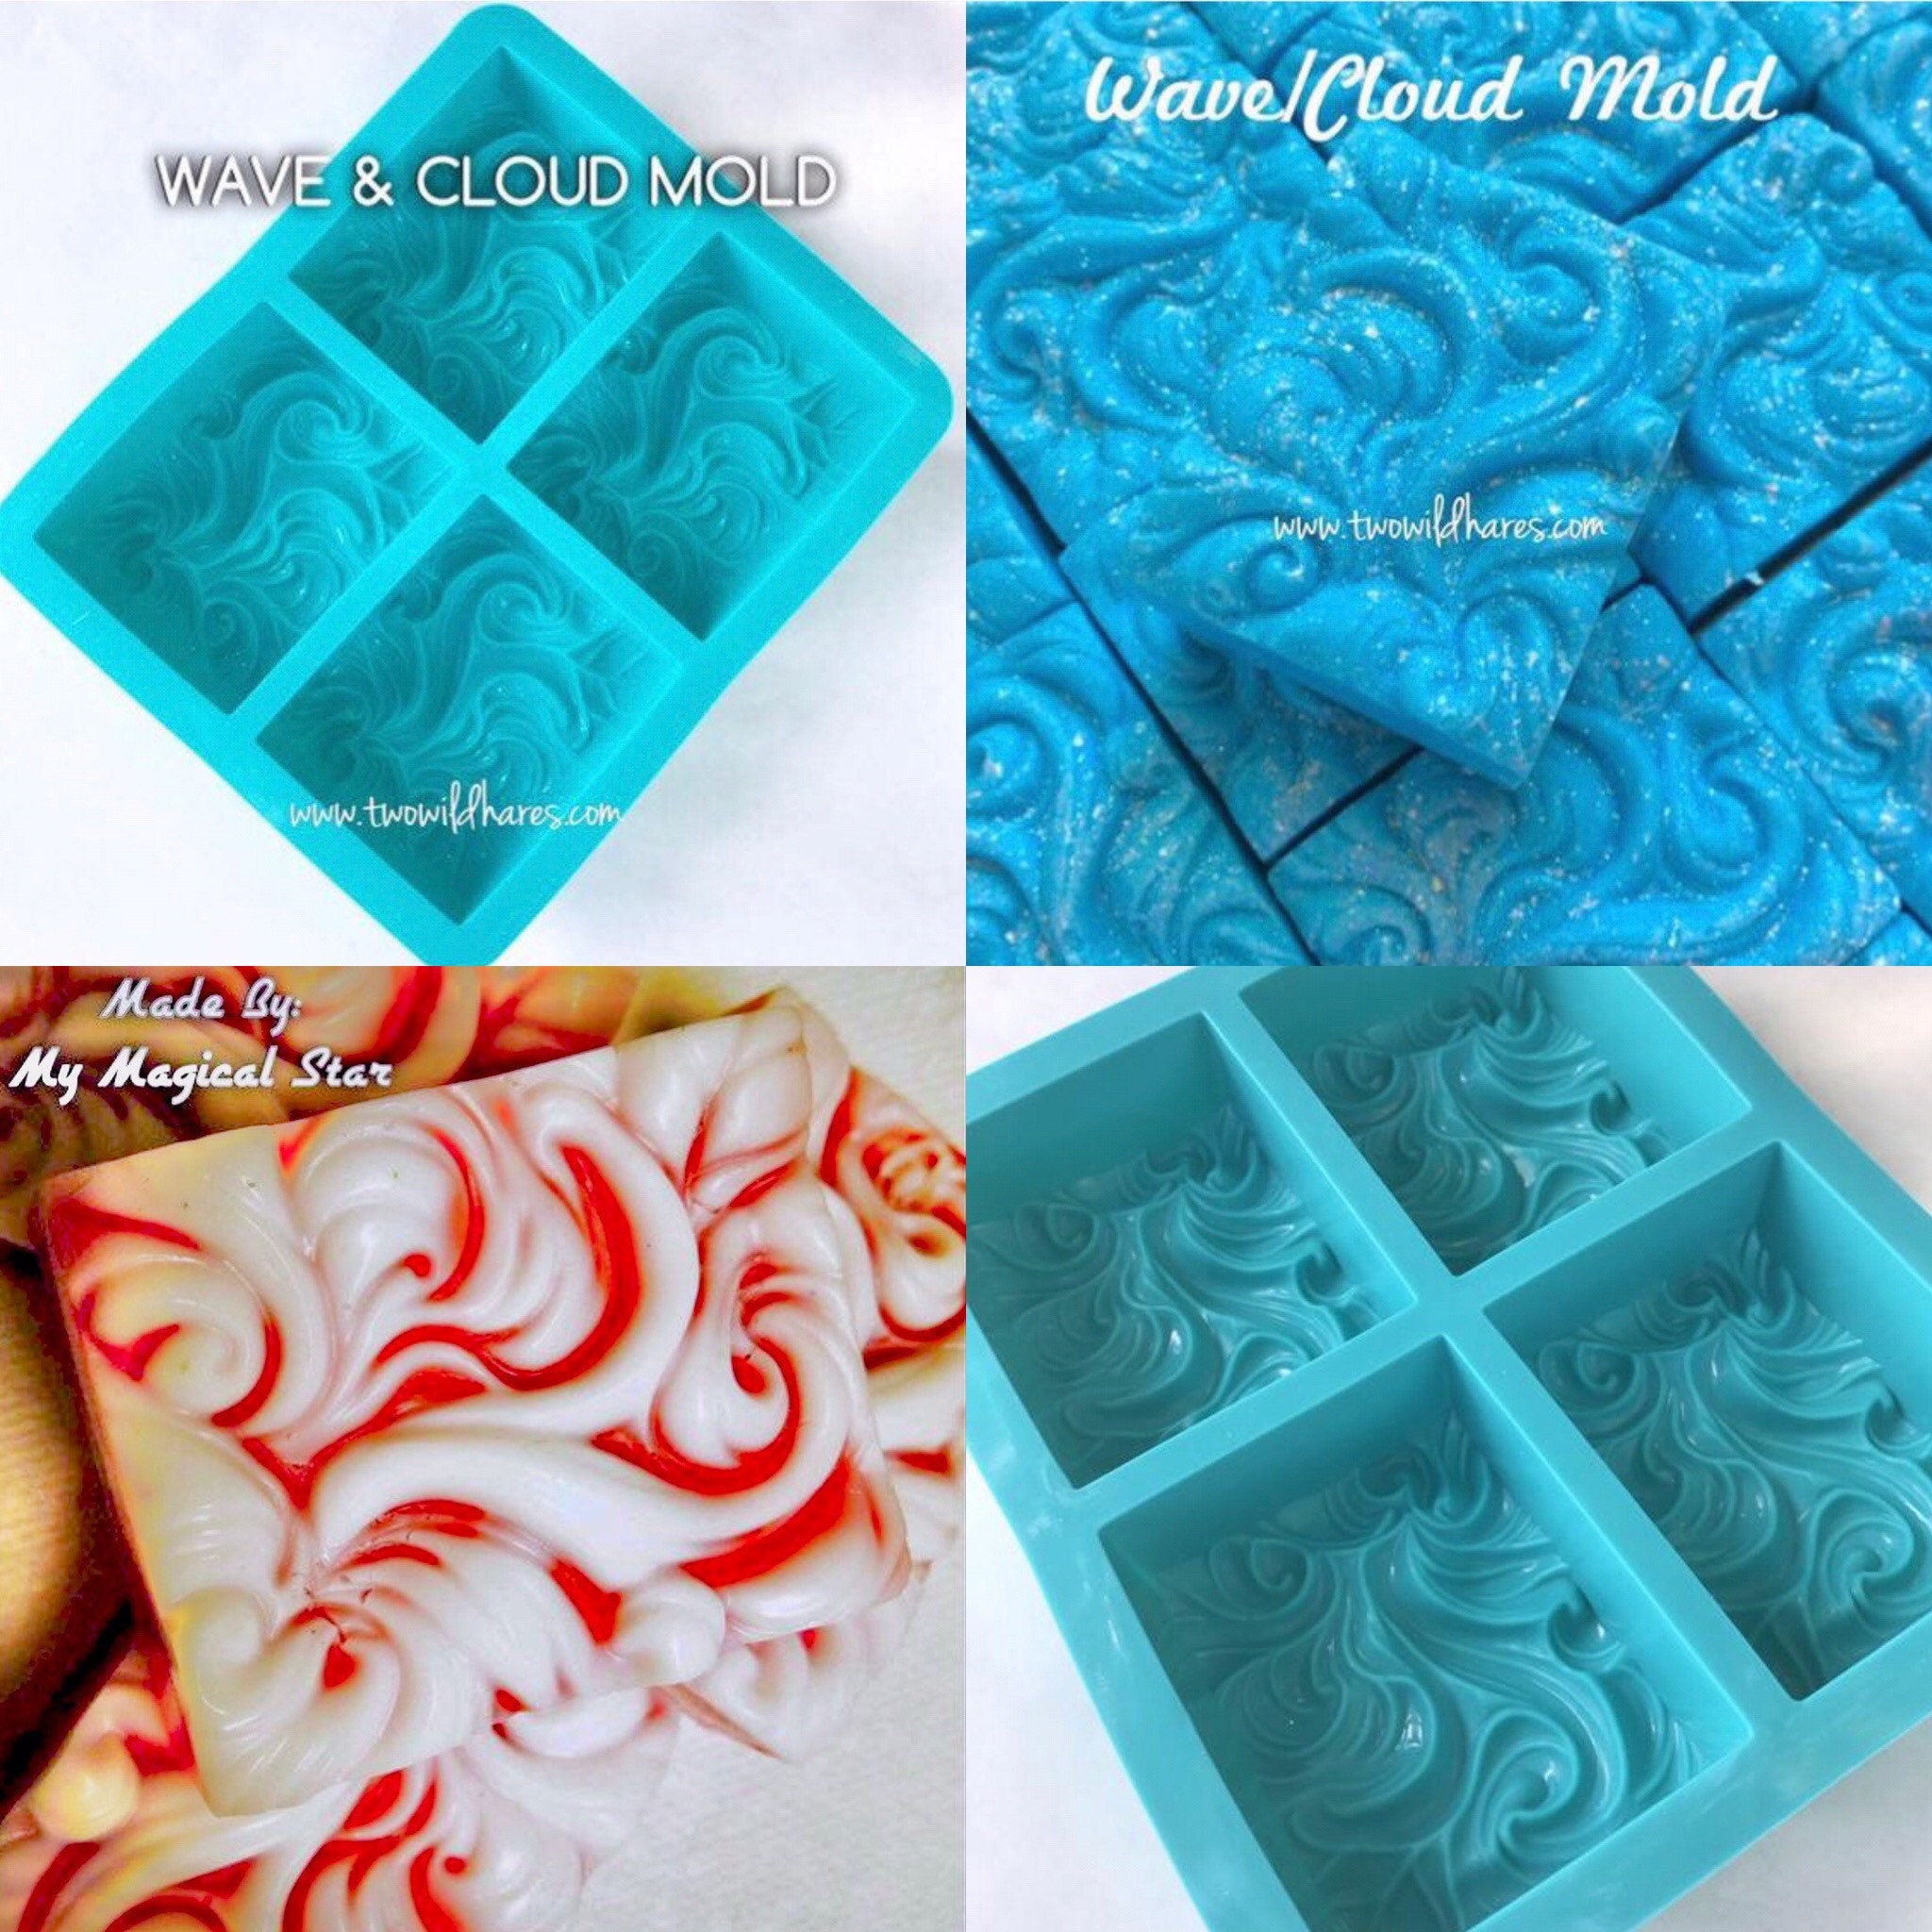 Rectangle Silicone Soap Mold, Large Silicone Mold for Soap Making, Thick  and Durable (2Pack).